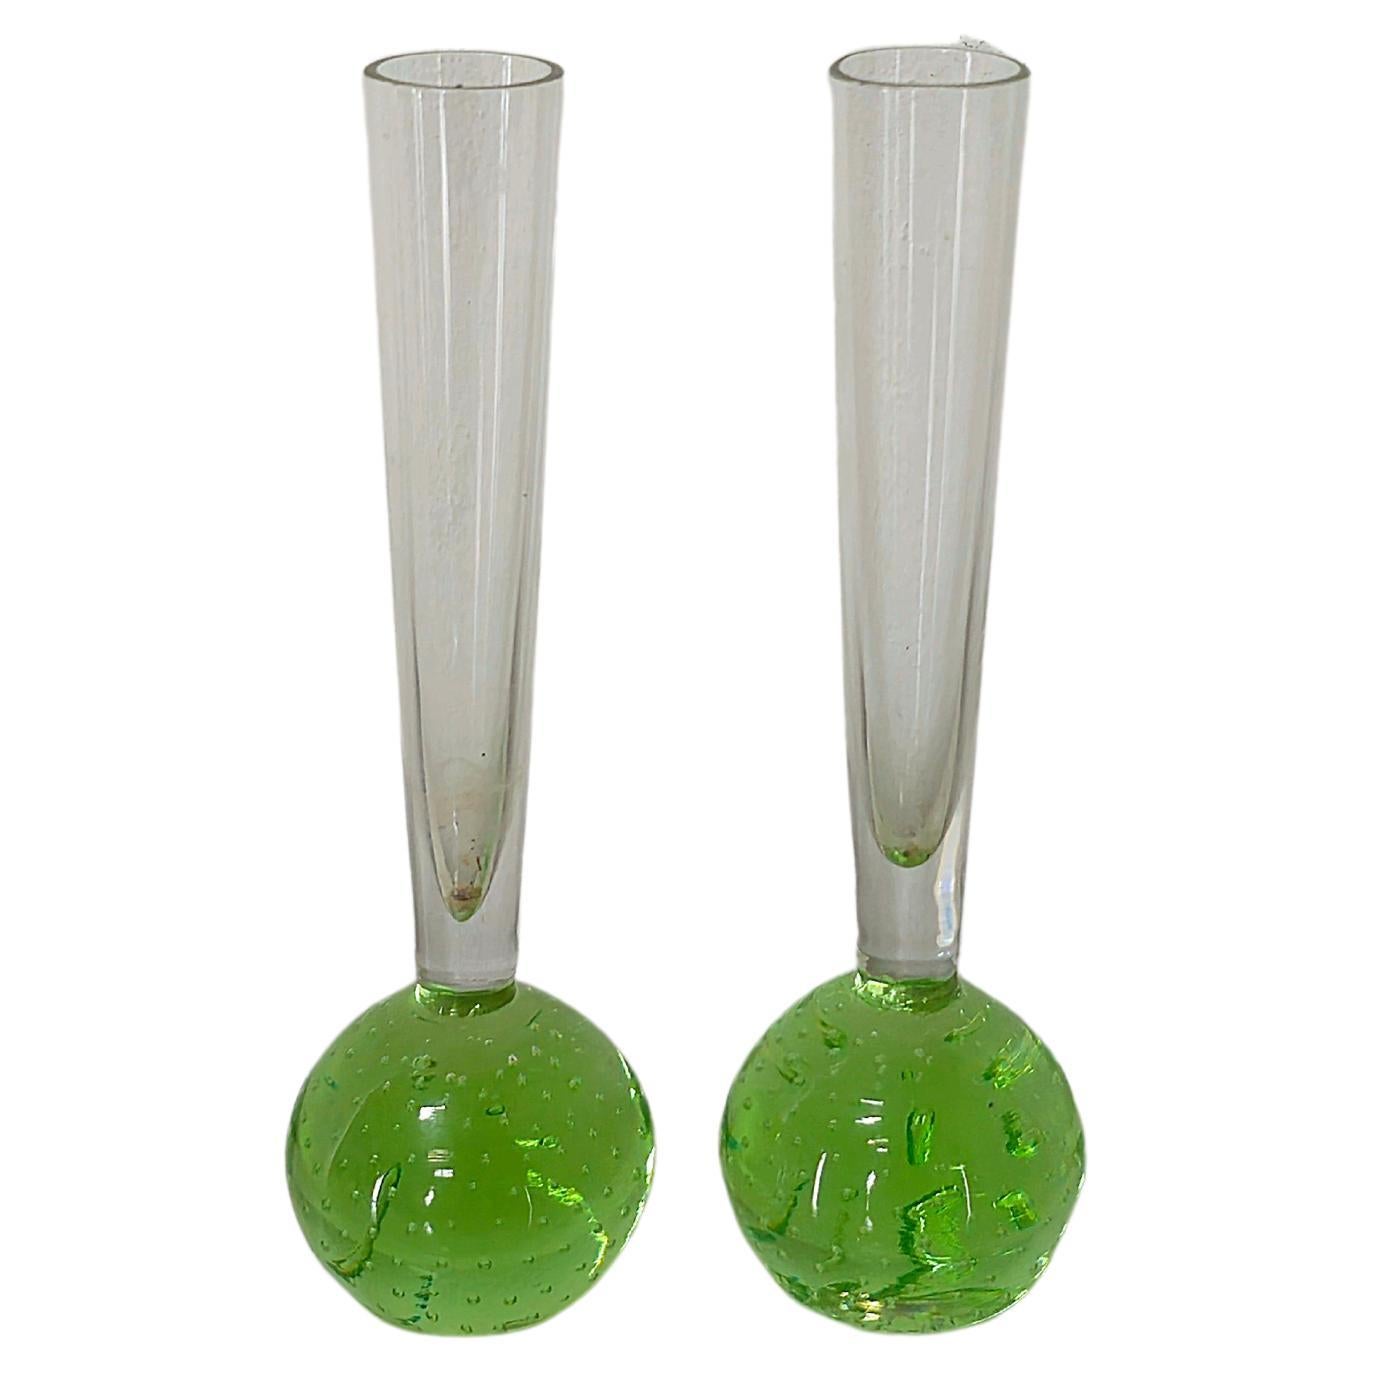 Decorative Objects Vases Murano Glass Midcentury Italian Design 1970s Set of 2 For Sale